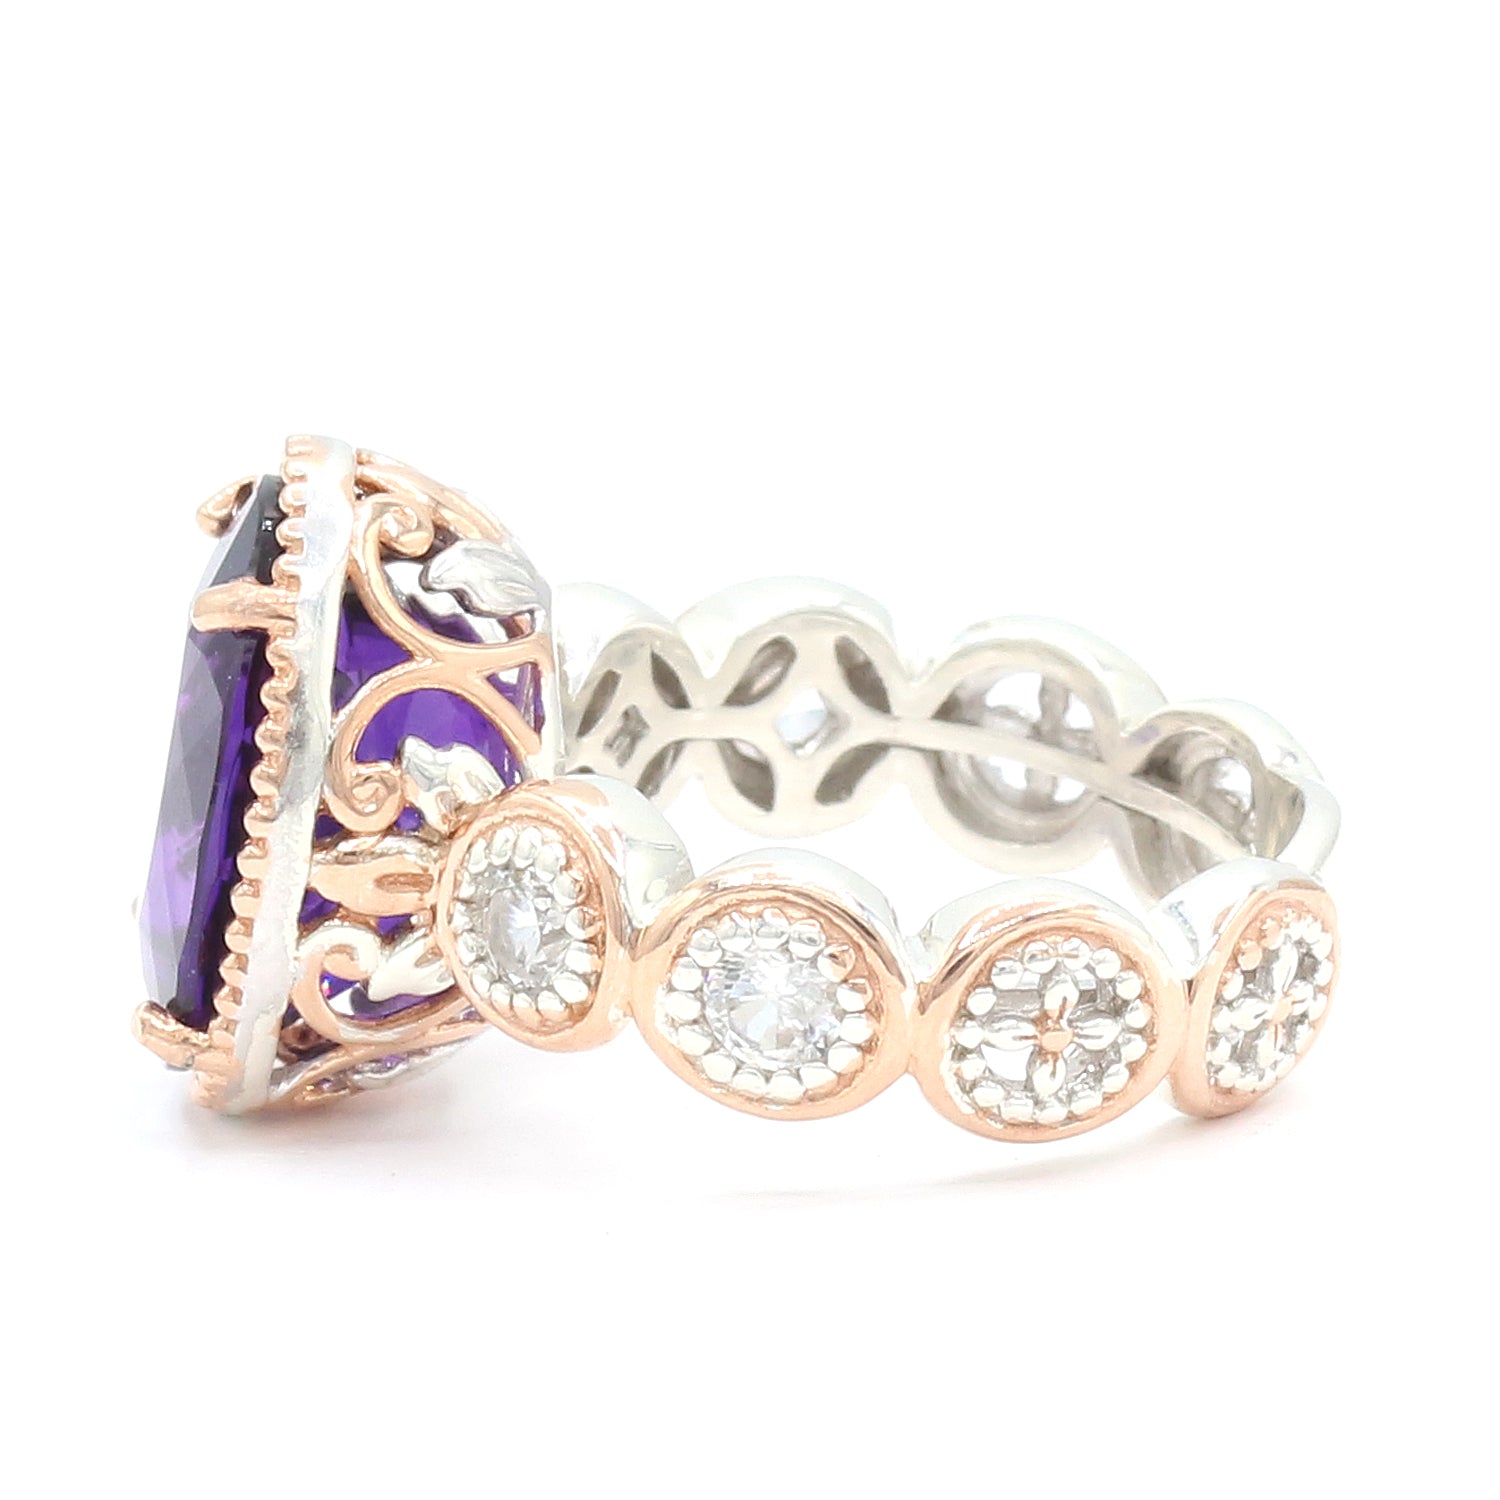 Gems en Vogue One-of-a-kind 5.50ctw Namibian Amethyst & White Zircon Ring